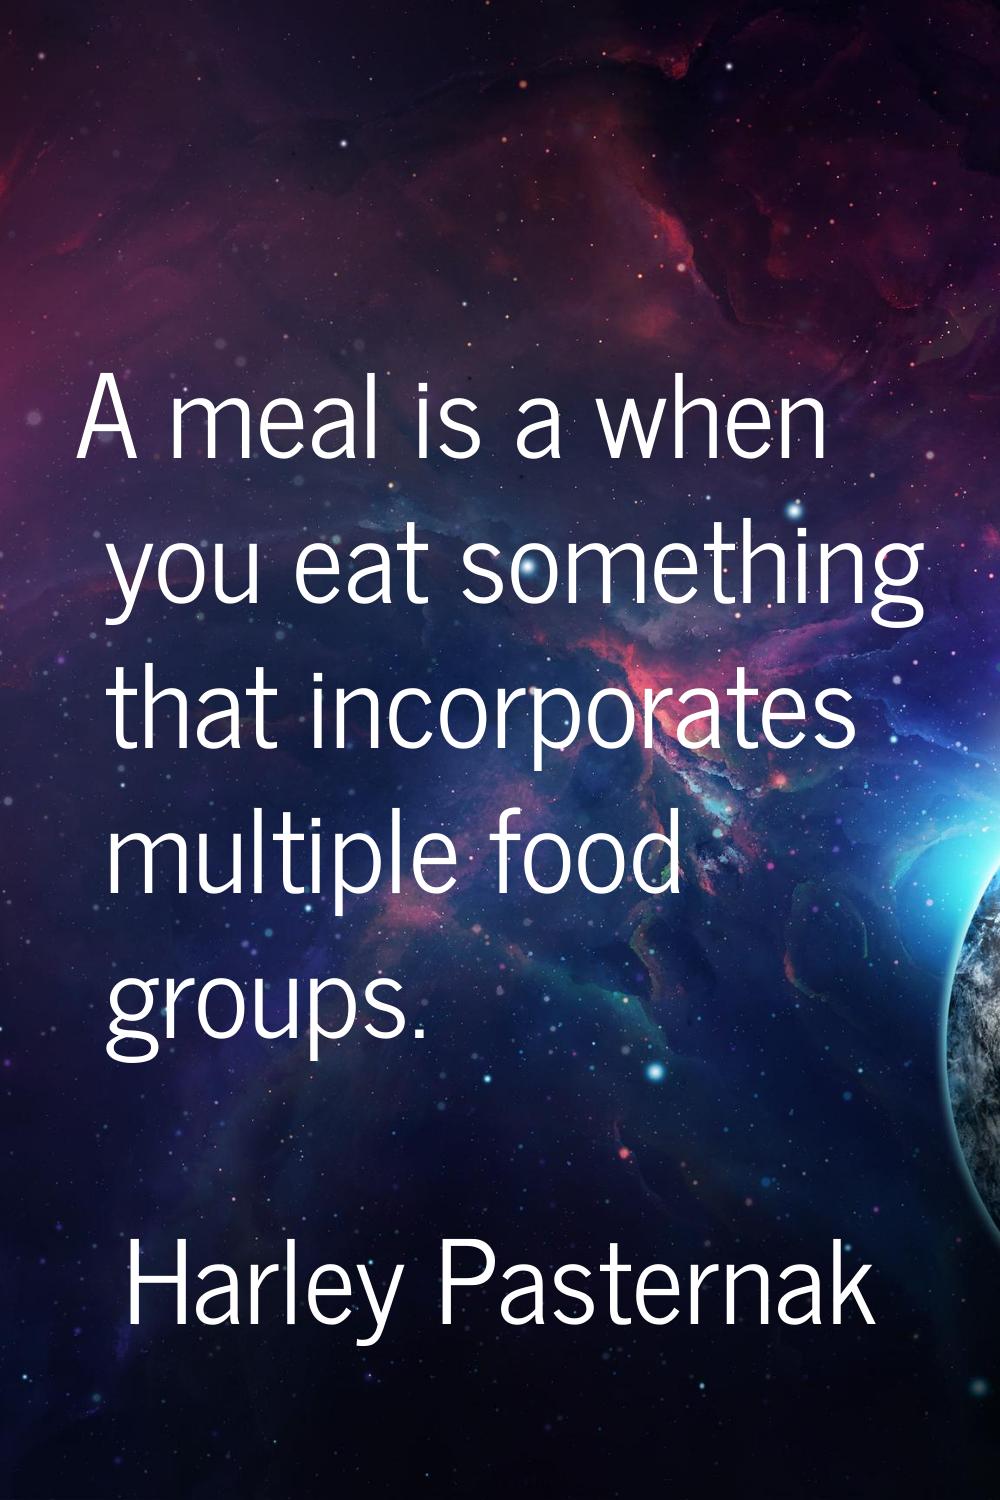 A meal is a when you eat something that incorporates multiple food groups.